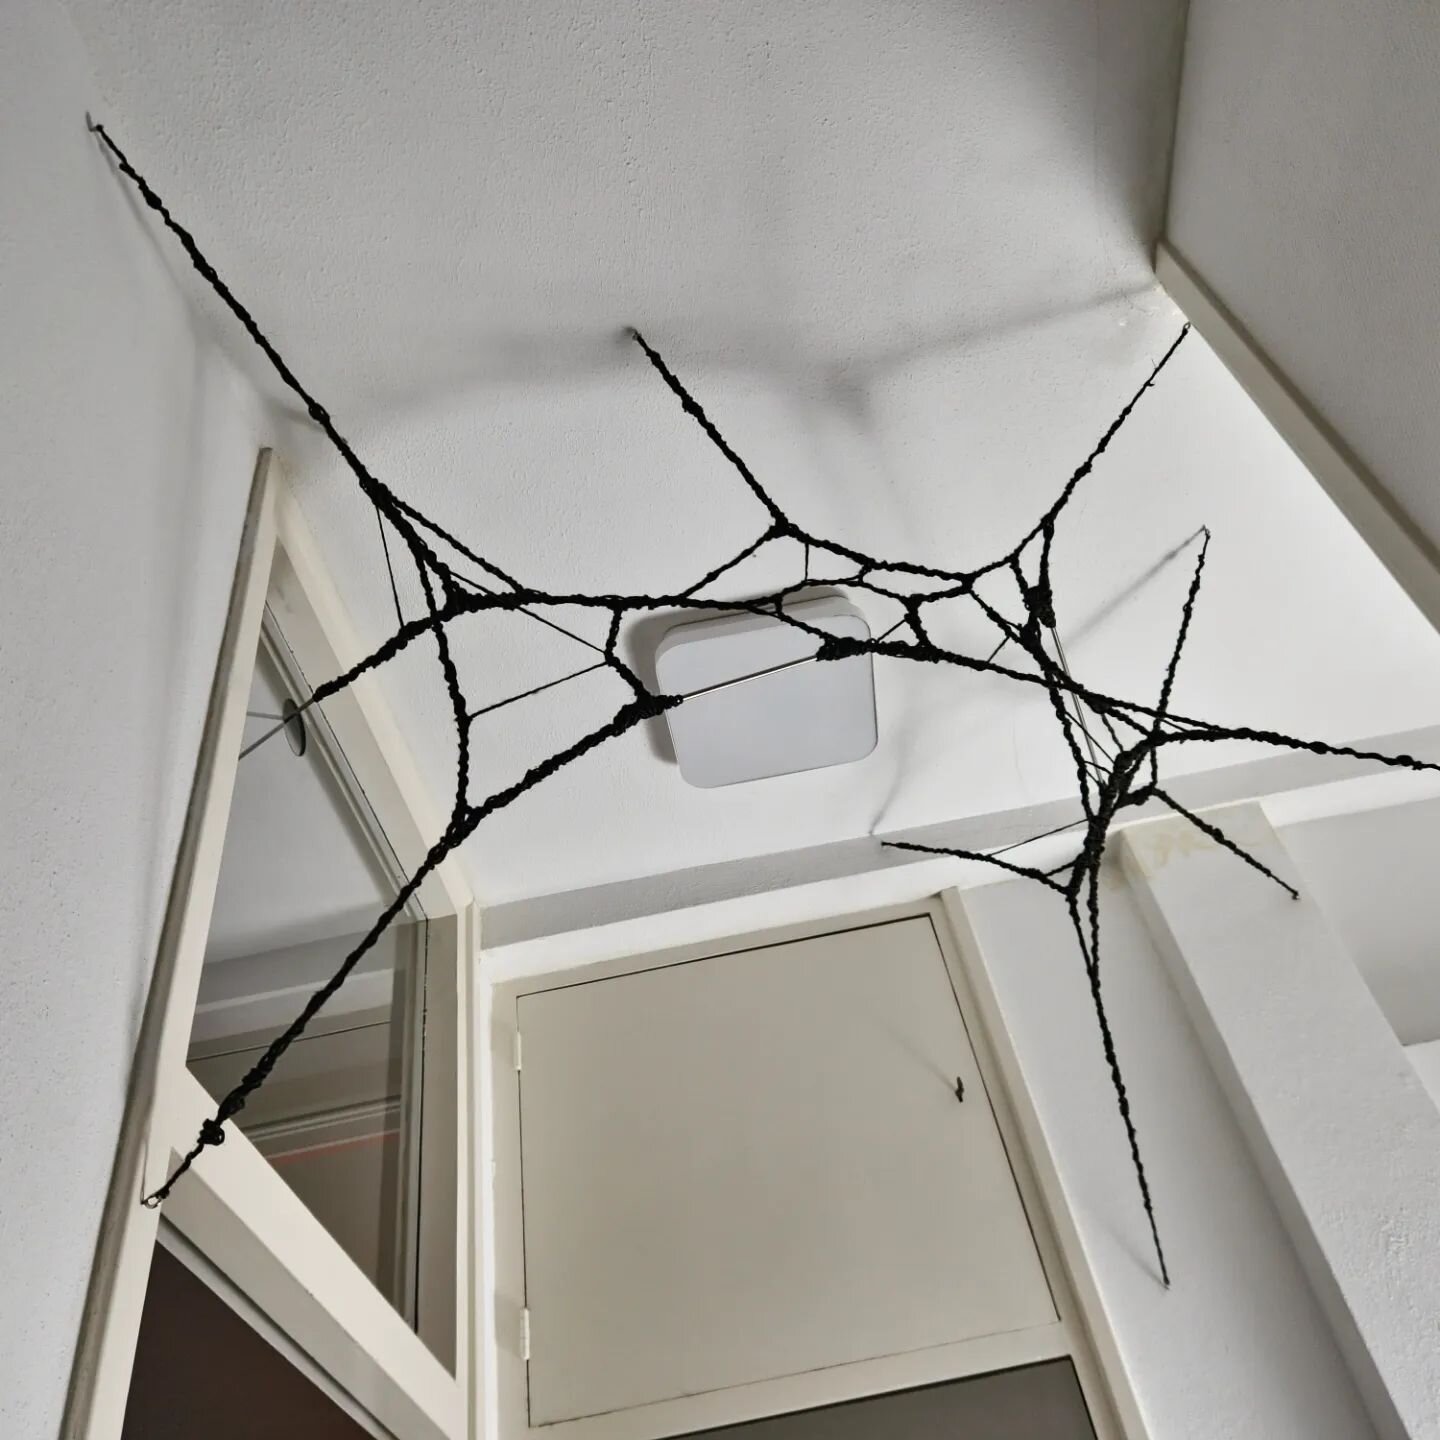 This work was made from mostly left over materials from the group exhibition 'Sustaining Small Acts'.

Installed permanently in the collection of @t_o_p__s_h_e_l_f

#installationart #network #artgallery #contemporaryart #upcycle #aesthetic #handmade 